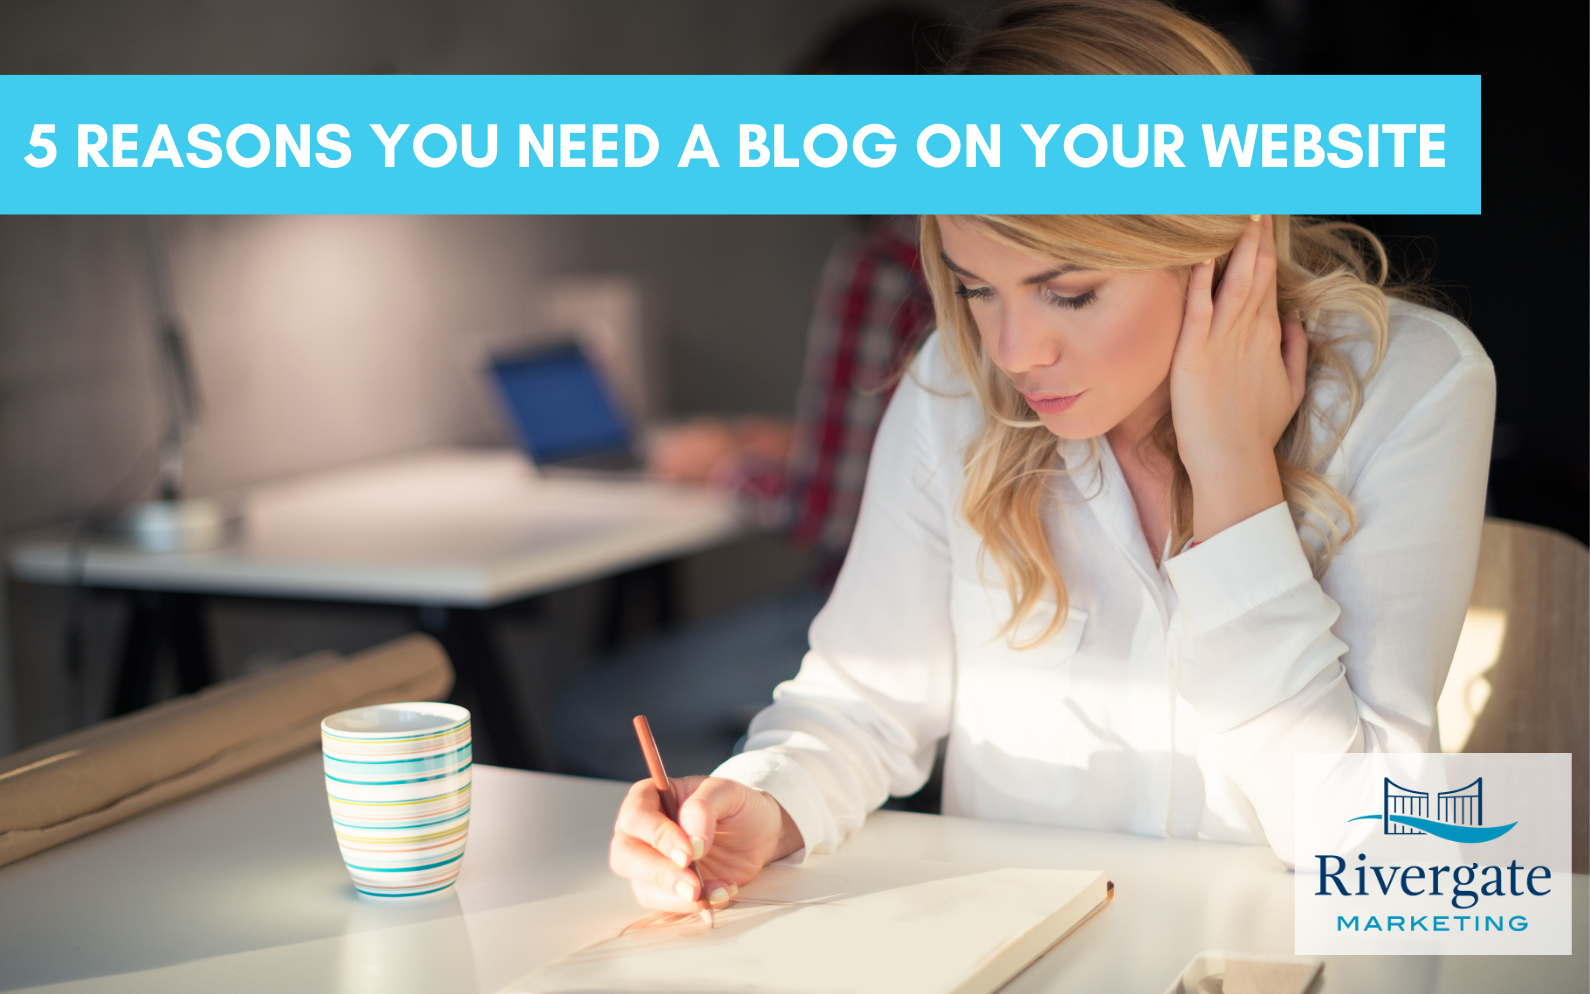 Rivergate Marketing - Five Reasons You Need a Blog on Your Website